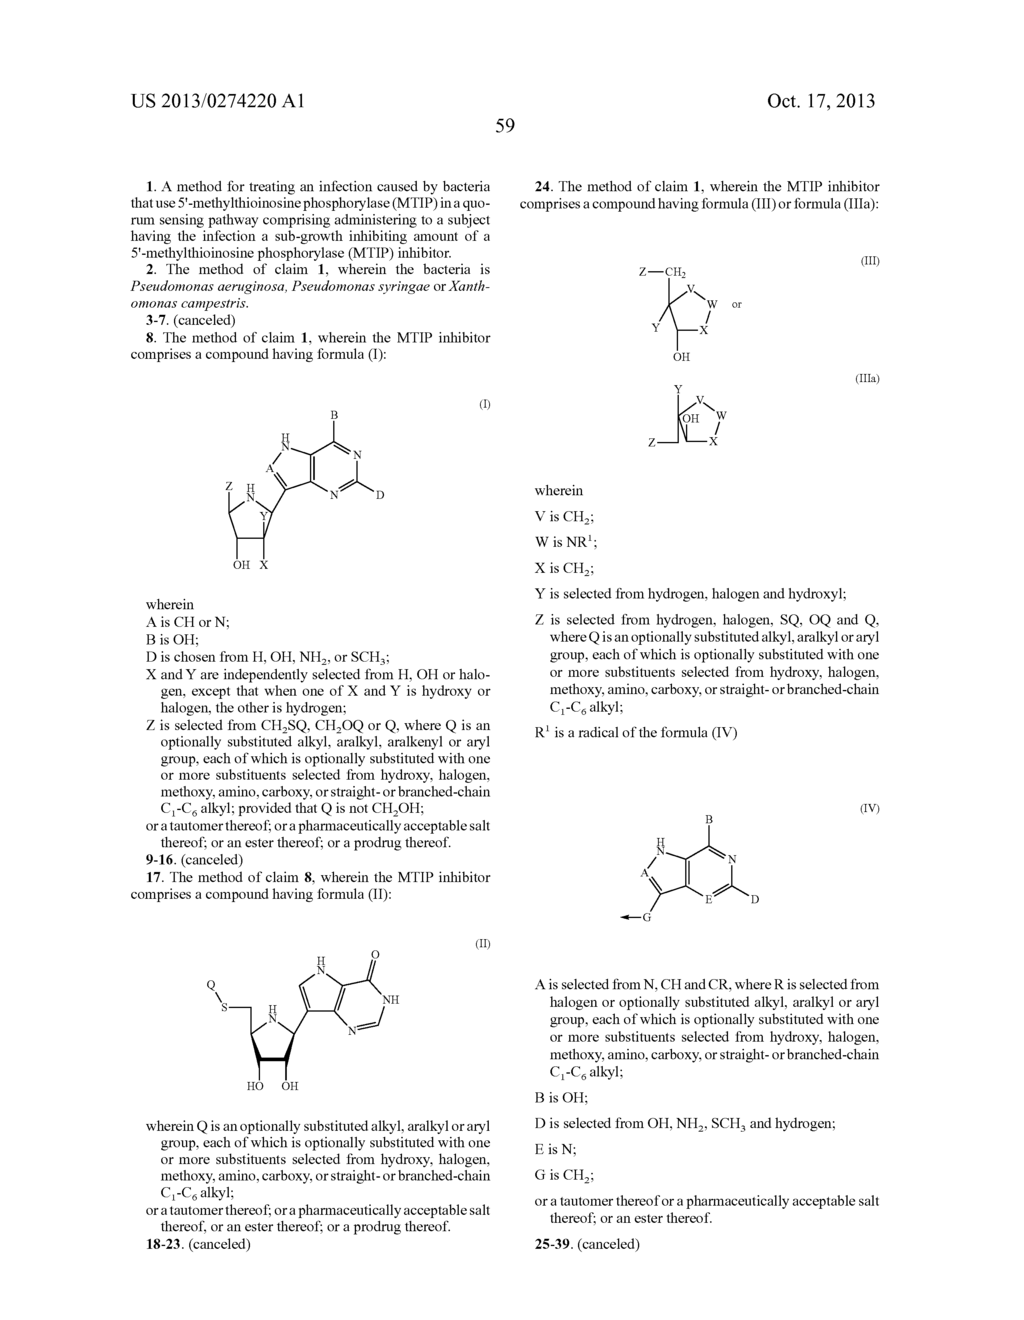 METHODS, ASSAYS AND COMPOUNDS FOR TREATING BACTERIAL INFECTIONS BY     INHIBITING METHYLTHIOINOSINE PHOSPHORYLASE - diagram, schematic, and image 63